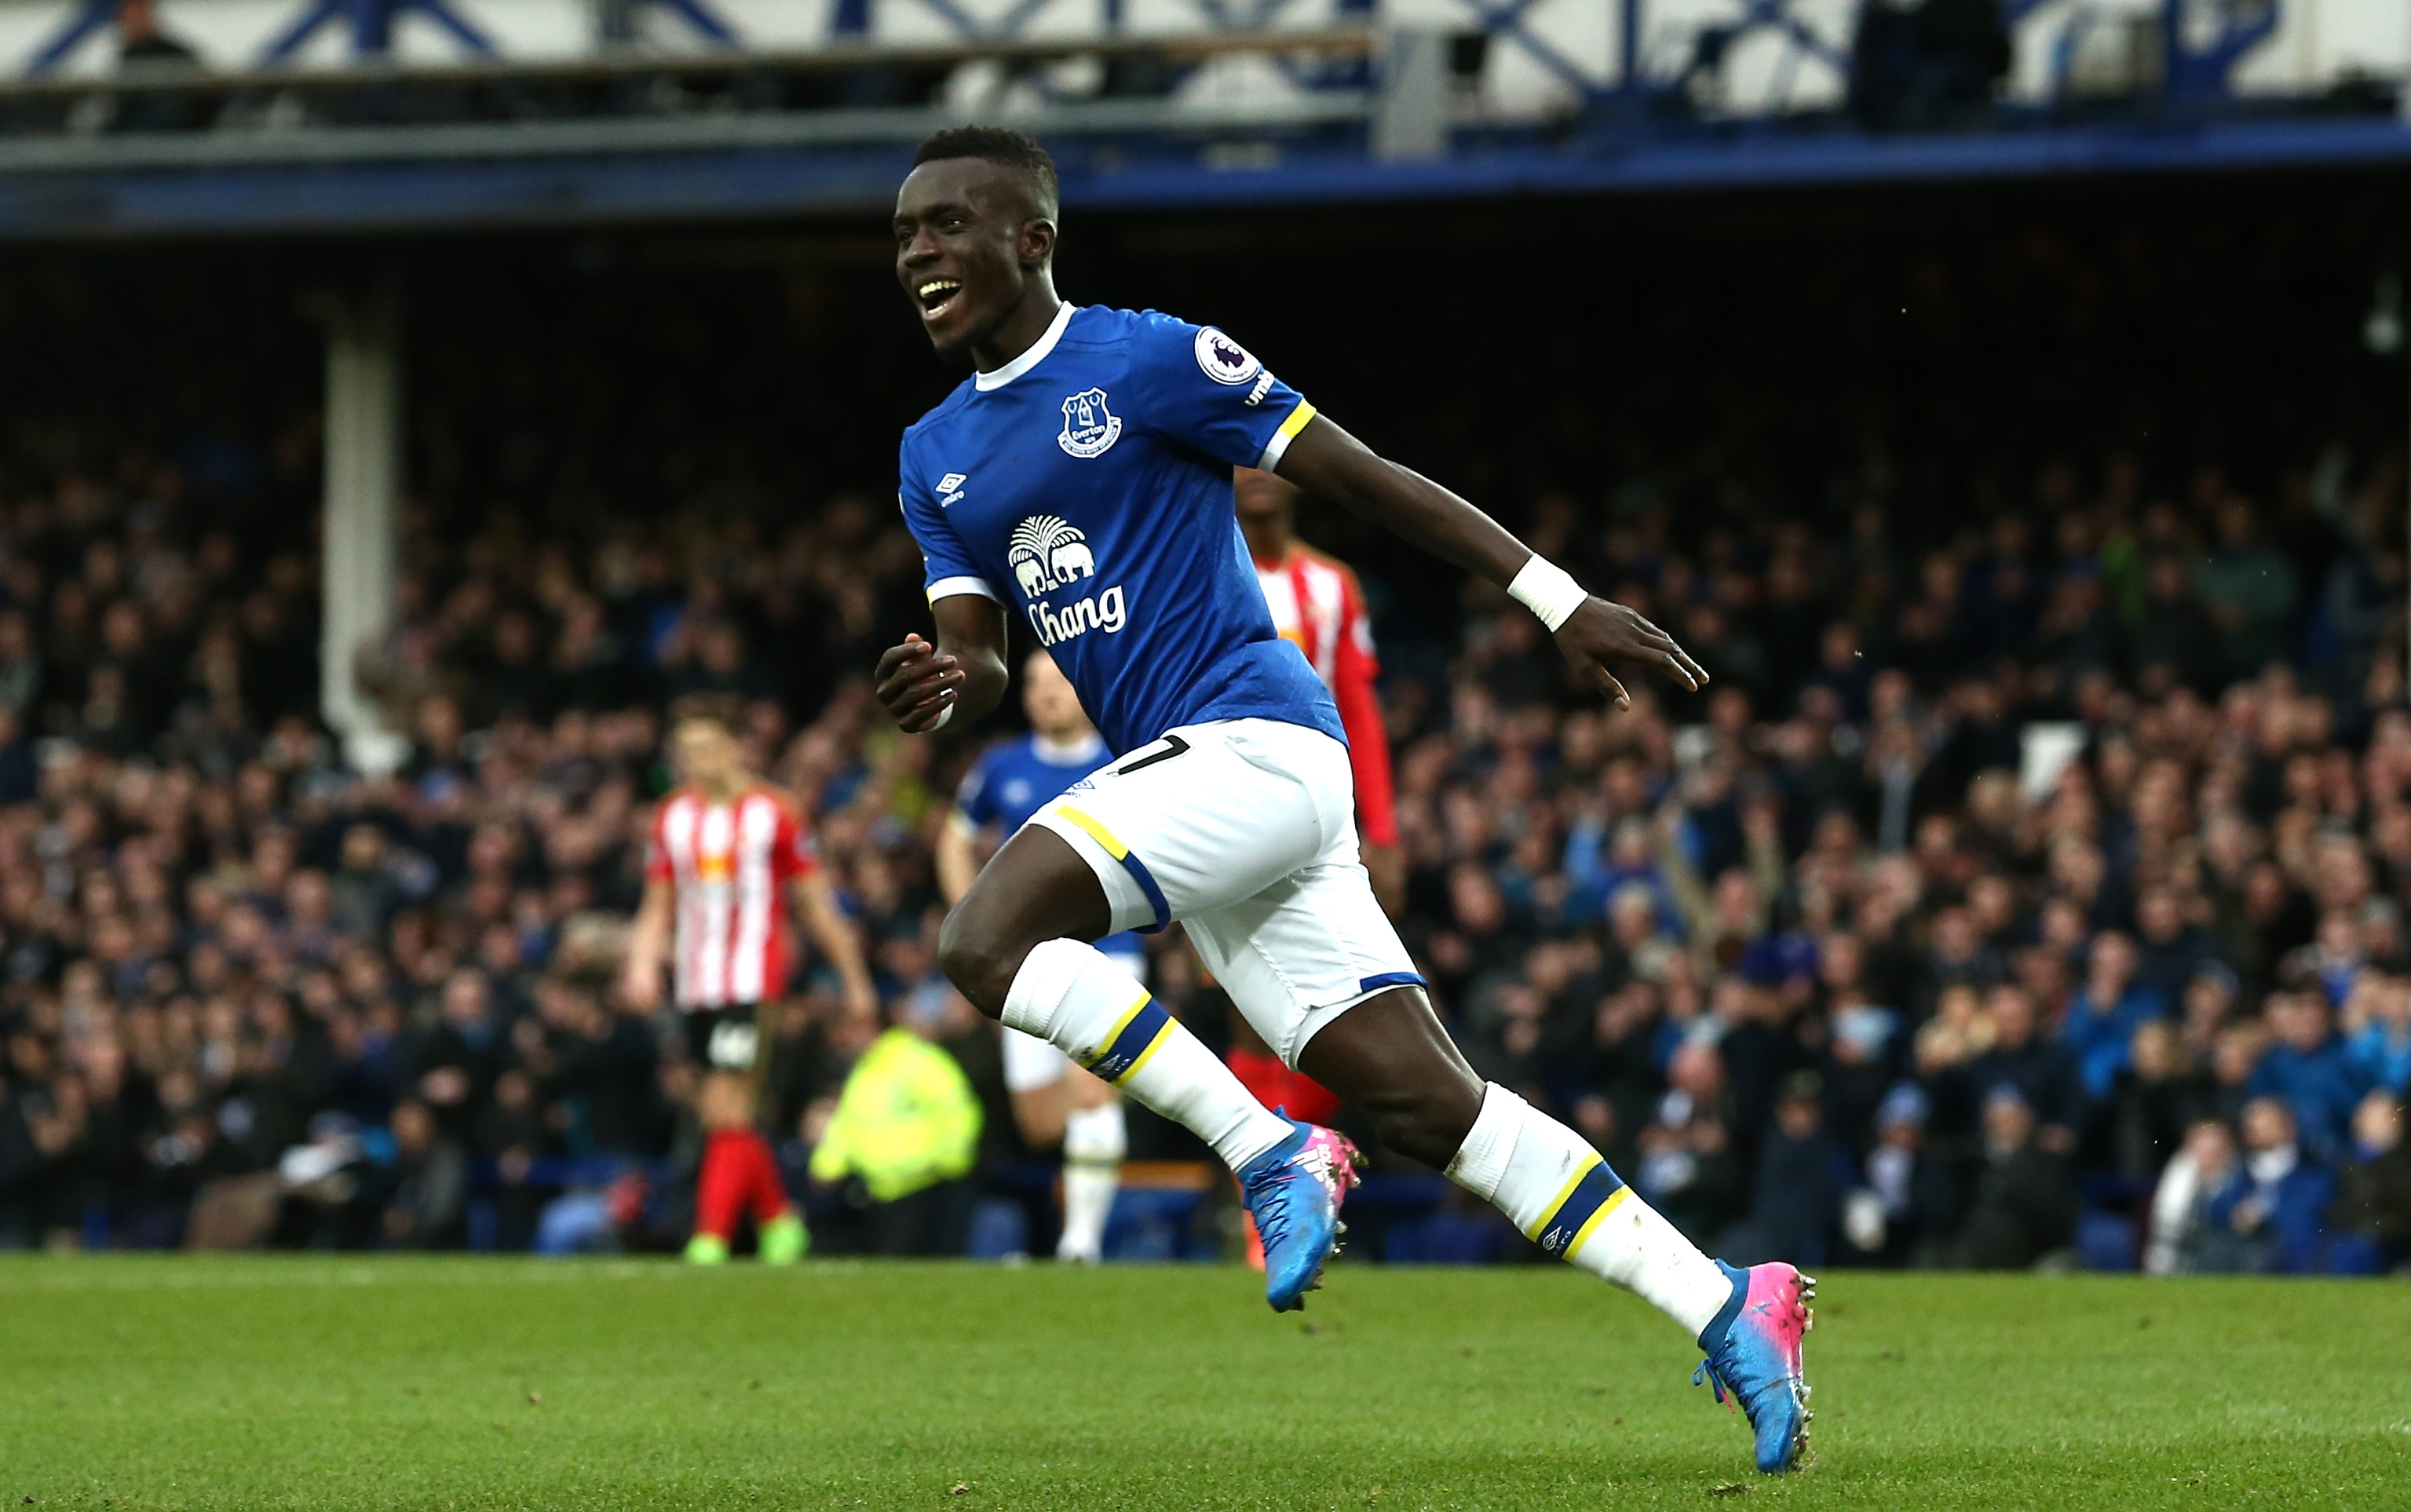 LIVERPOOL, ENGLAND - FEBRUARY 25: Idrissa Gueye of Everton celebrates scoring his sides first goal during the Premier League match between Everton and Sunderland at Goodison Park on February 25, 2017 in Liverpool, England.  (Photo by Jan Kruger/Getty Images)